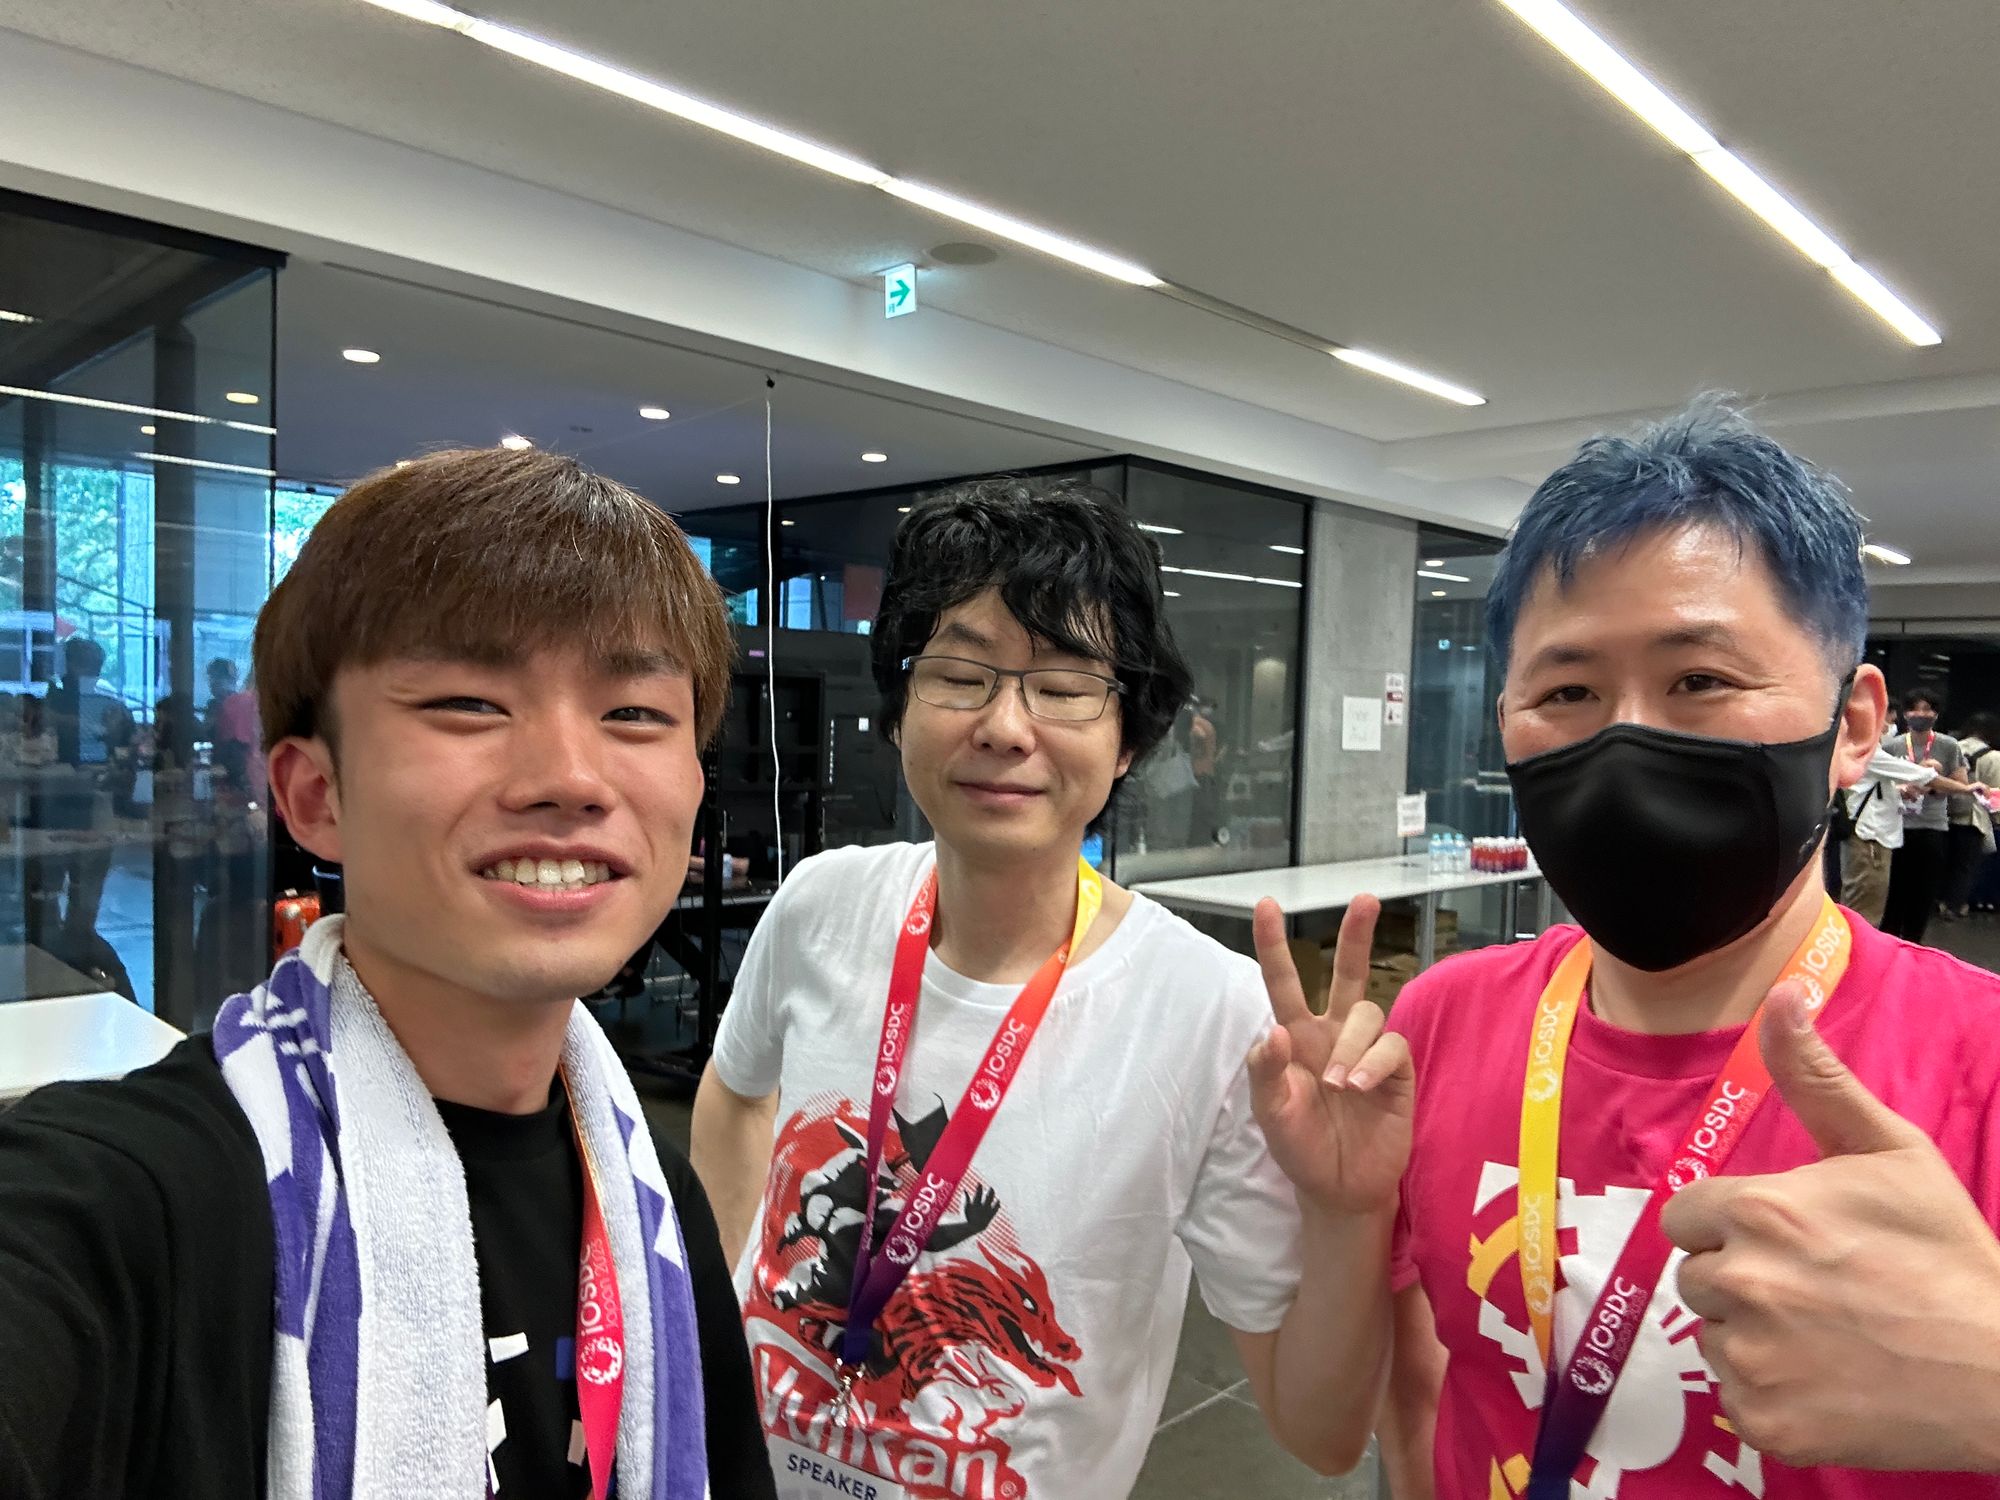 iOSDC Japan 2023 Report Day 2